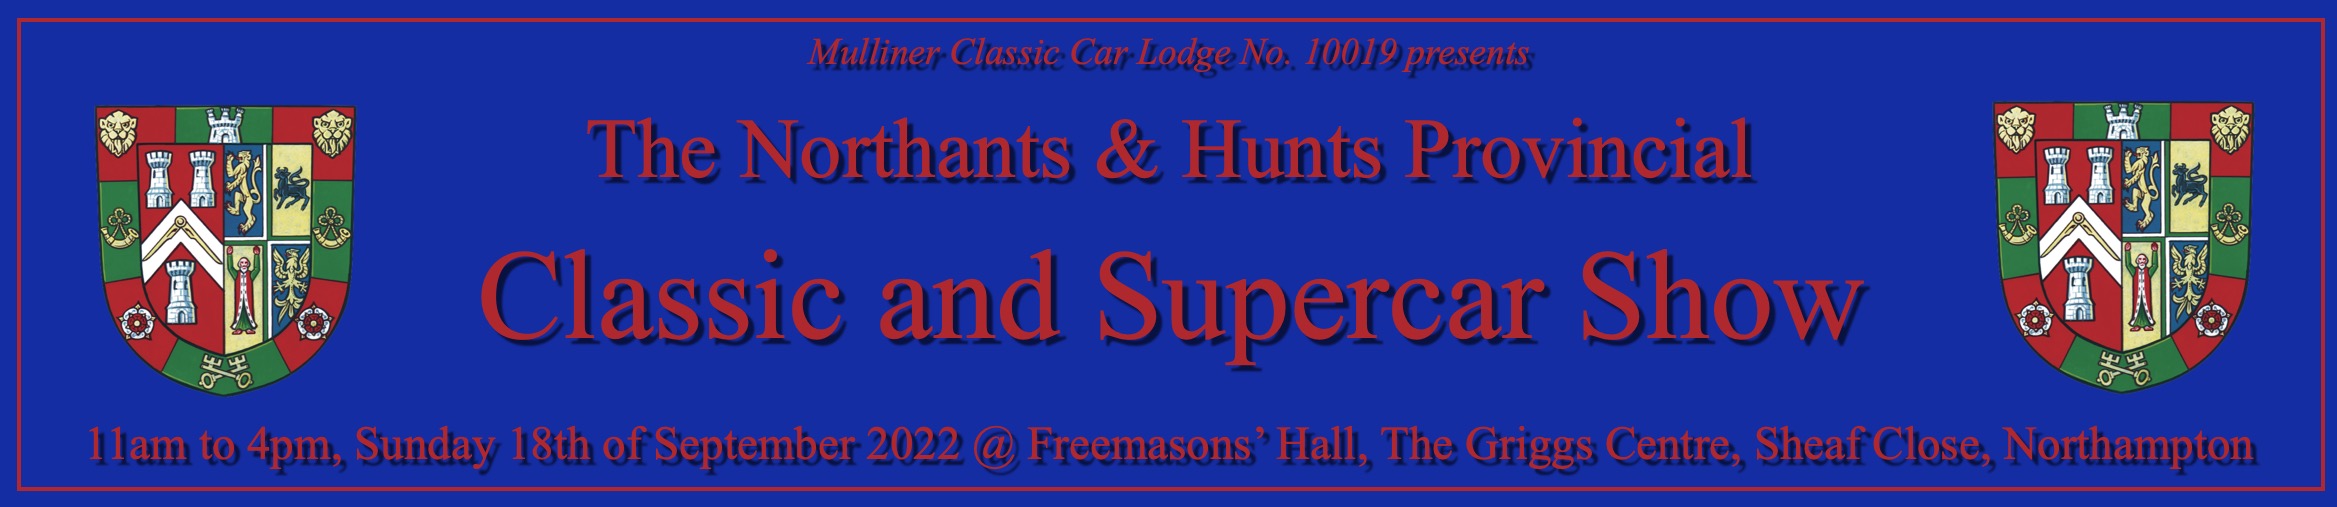 22 08 12 classic and supercar show 18th september 2022 advertising banner